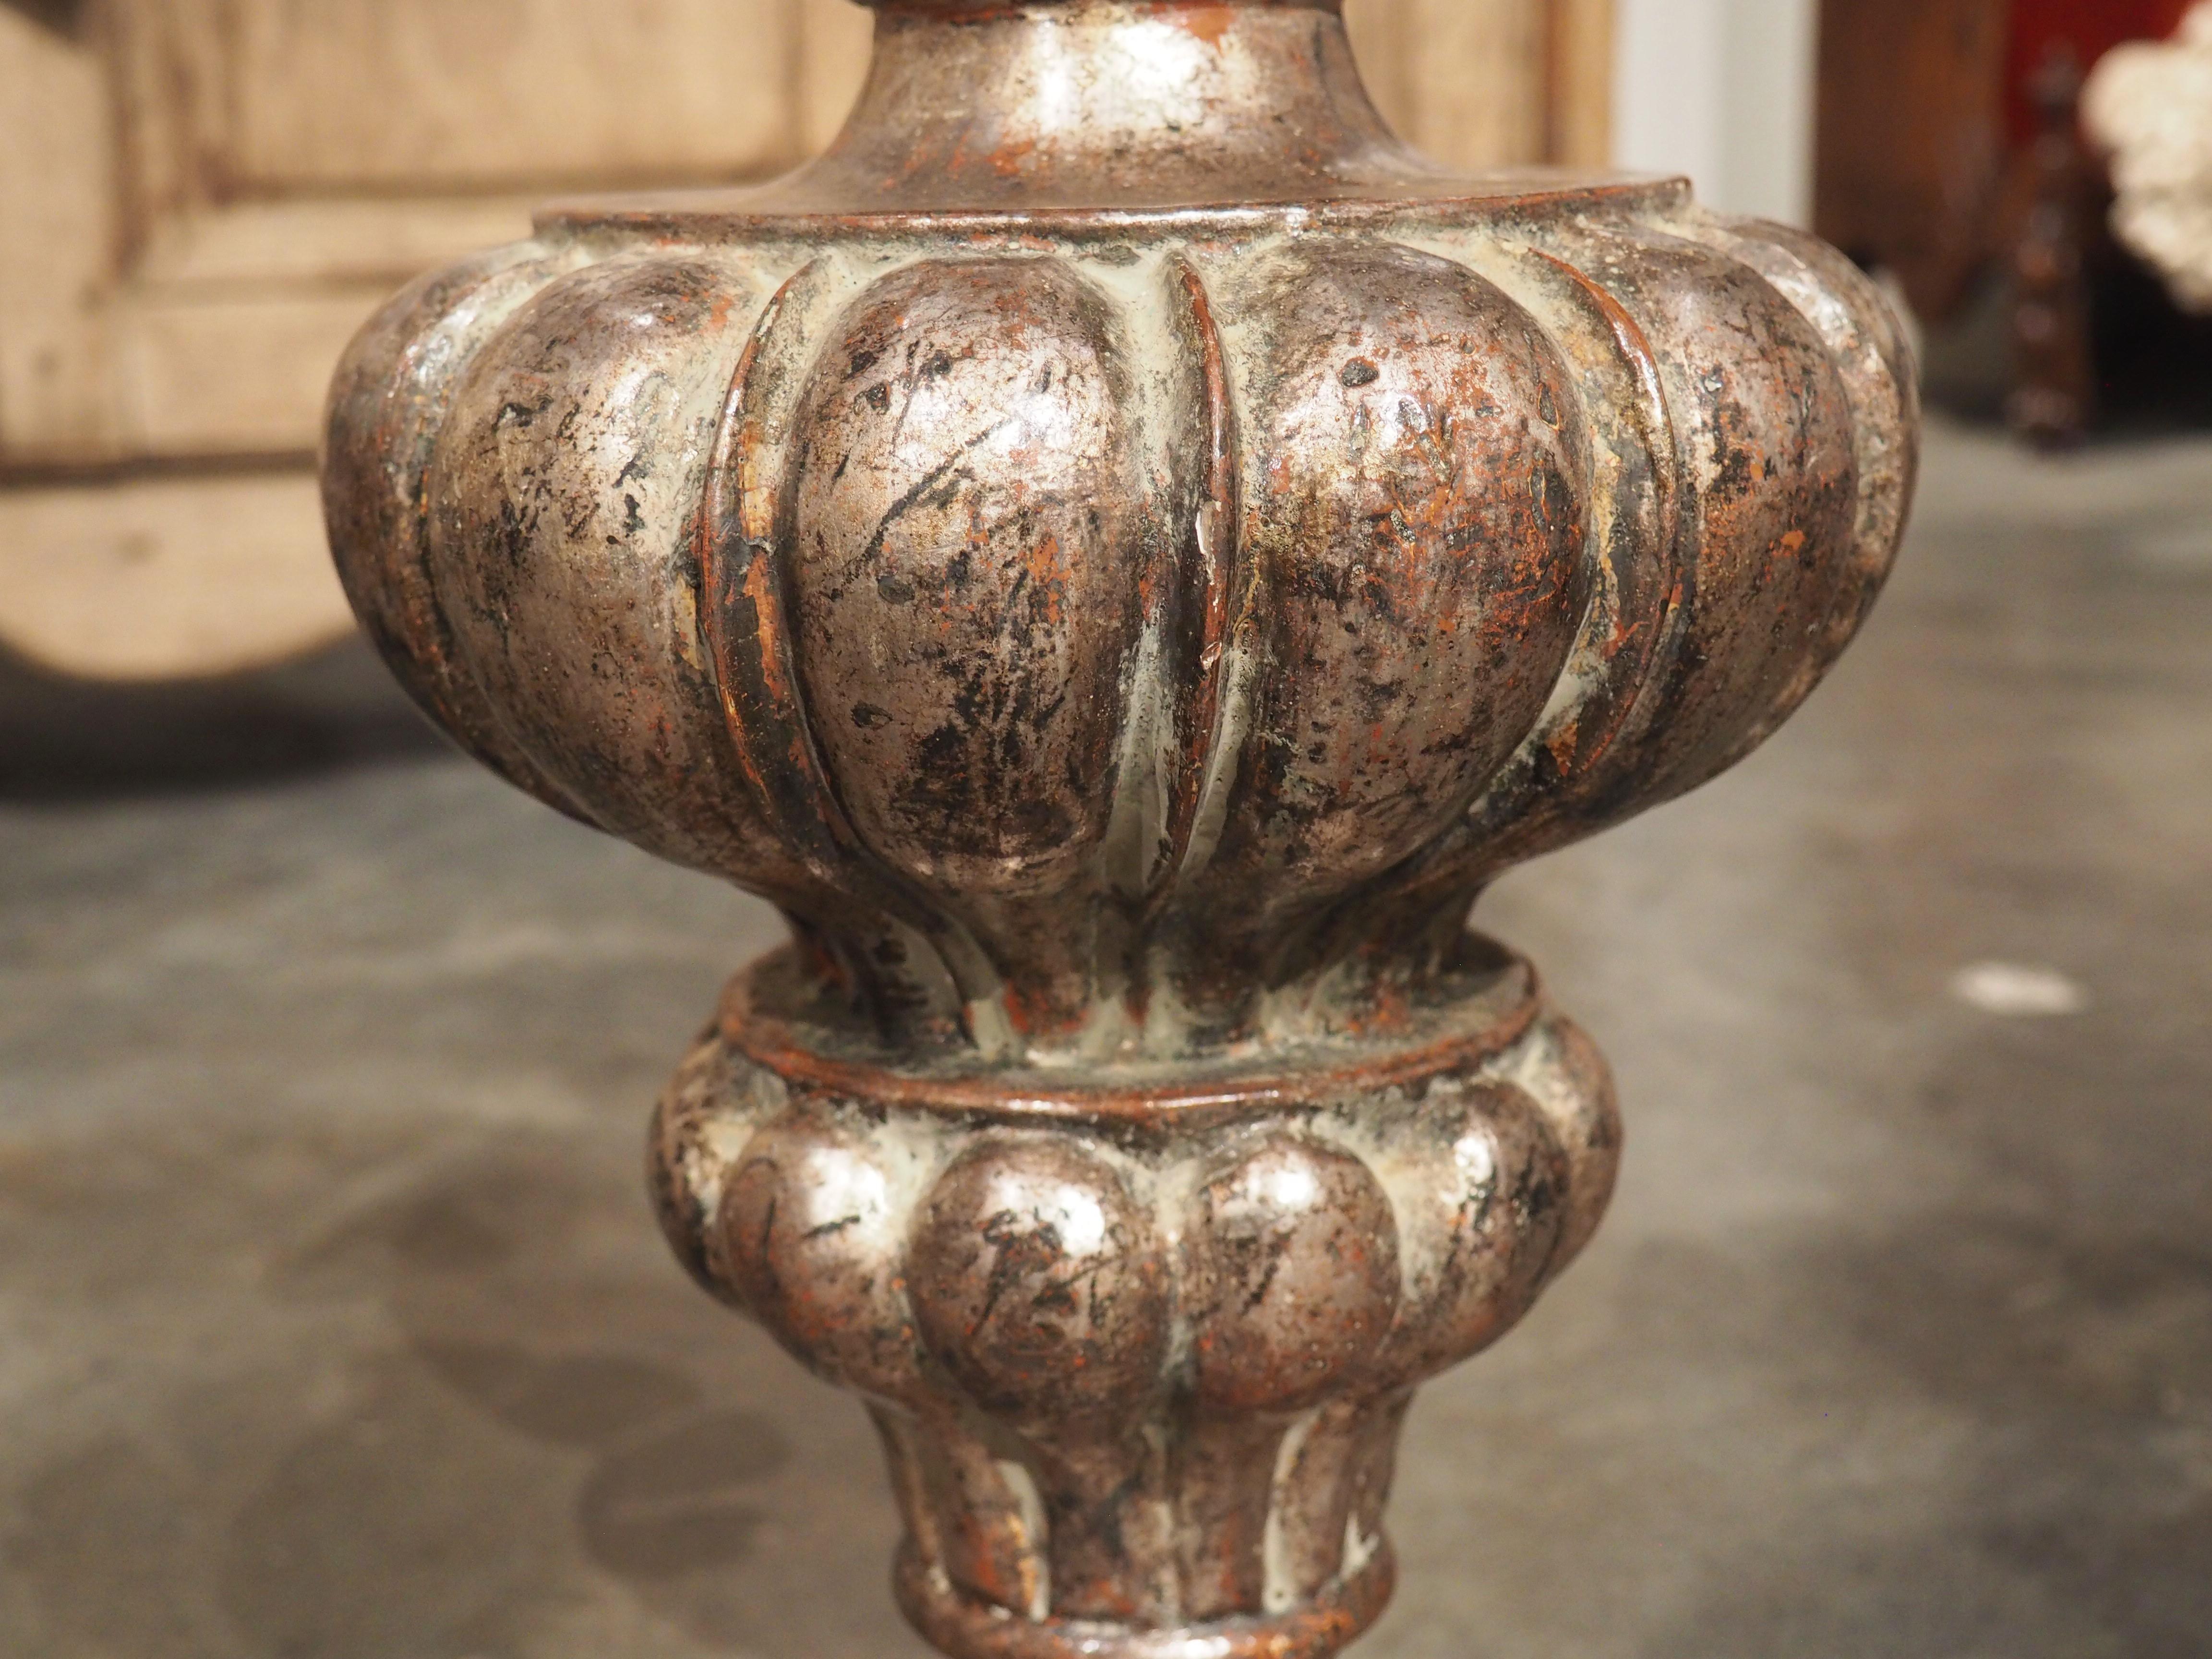 These silver gilt candlesticks from Tuscany have been crafted in the style of the 17th and 18th century altar prickets and are suitable for many aesthetics. These are finished in an antiqued silver patination, adding a distinctive touch to your